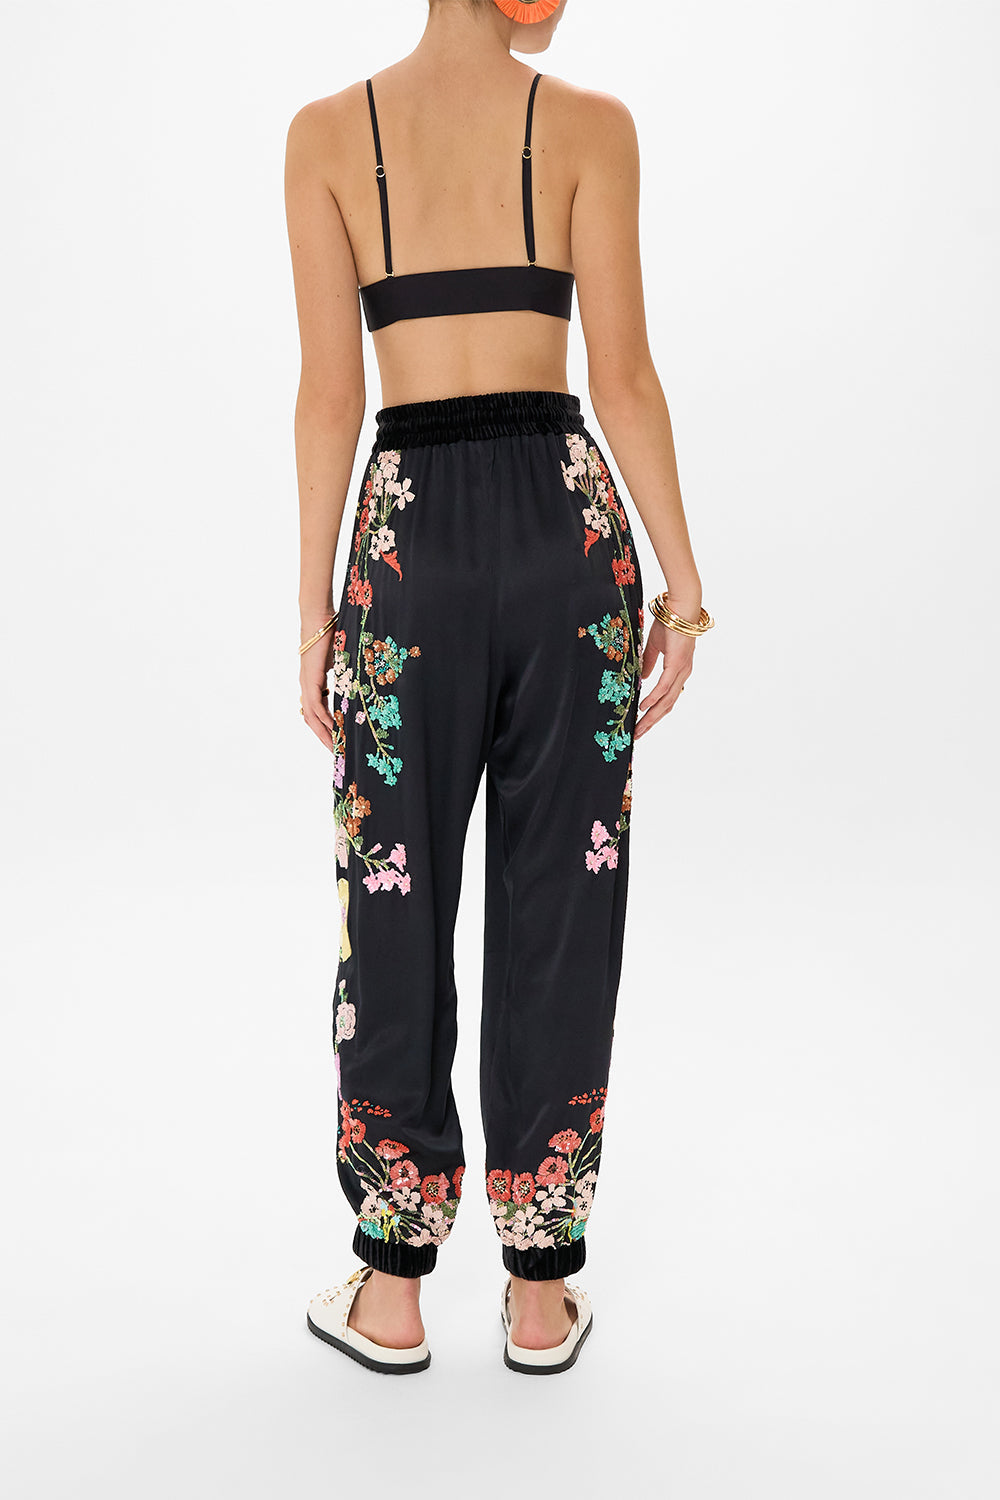 CAMILLA embellished trackpants in We Wore Folklore print